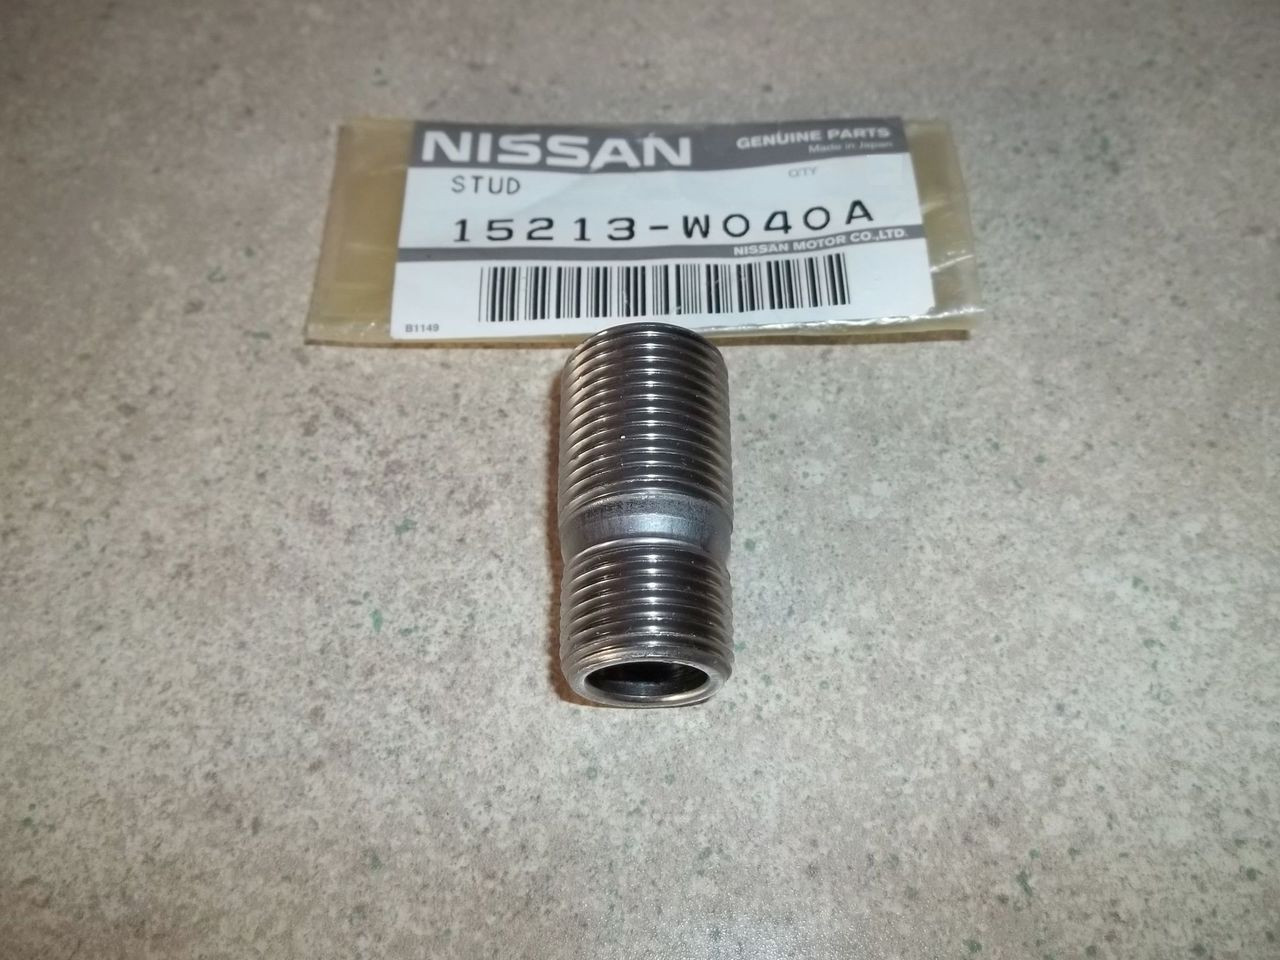 Oil Filter Mounting Stud For Datsun Nissan L4 L6 NAPS-Z & Many Others See More Fitments In Listing 15213-W040A